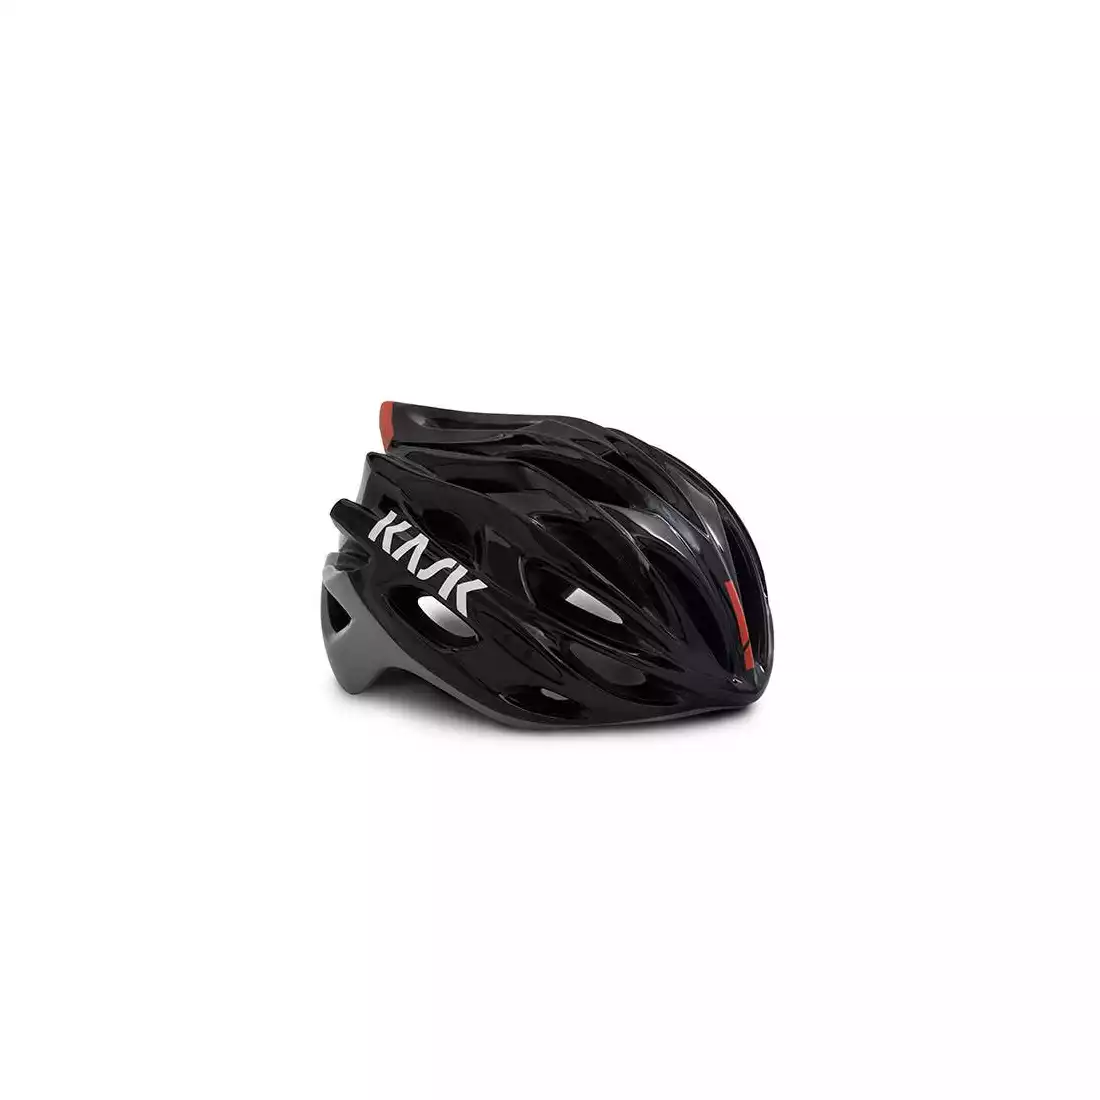 KASK MOJITO X - kask rowerowy CHE00053.240 black ash red